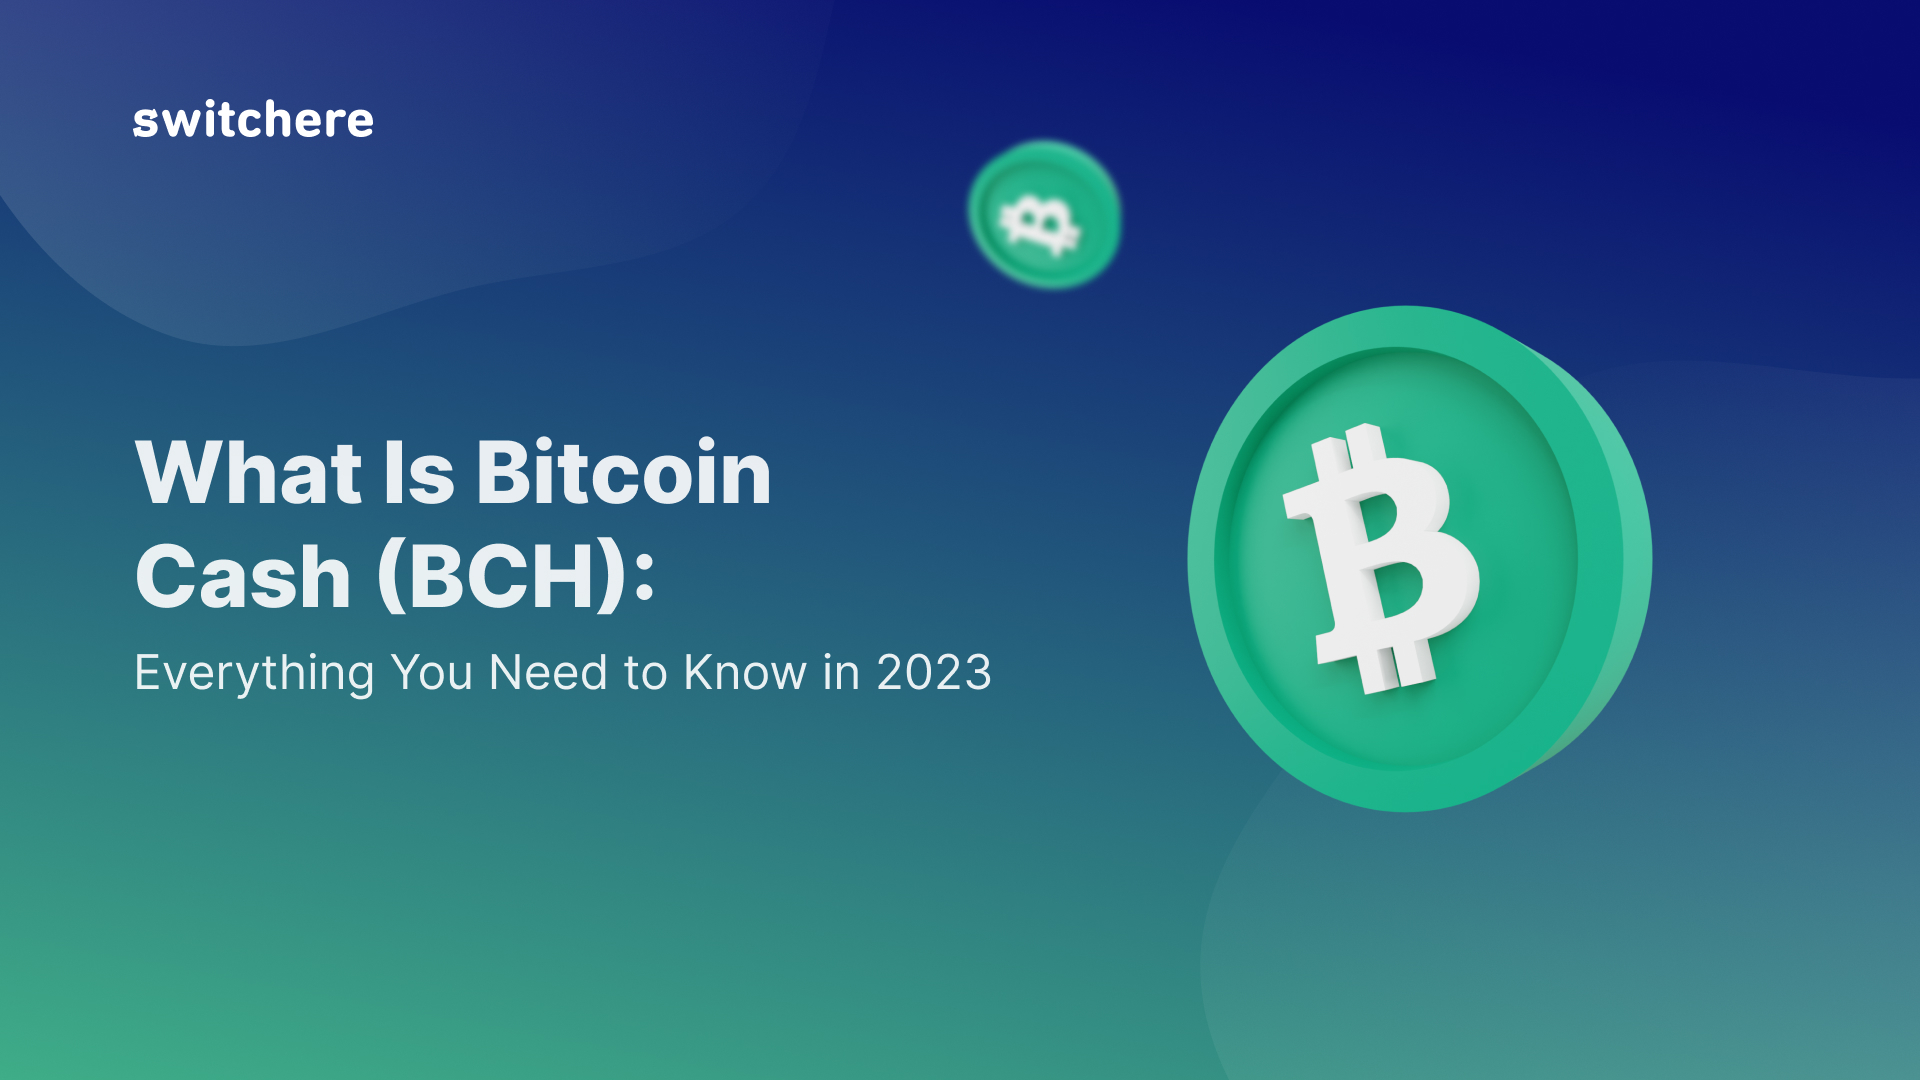 What Is Bitcoin Cash (BCH): Everything You Need to Know in 2023